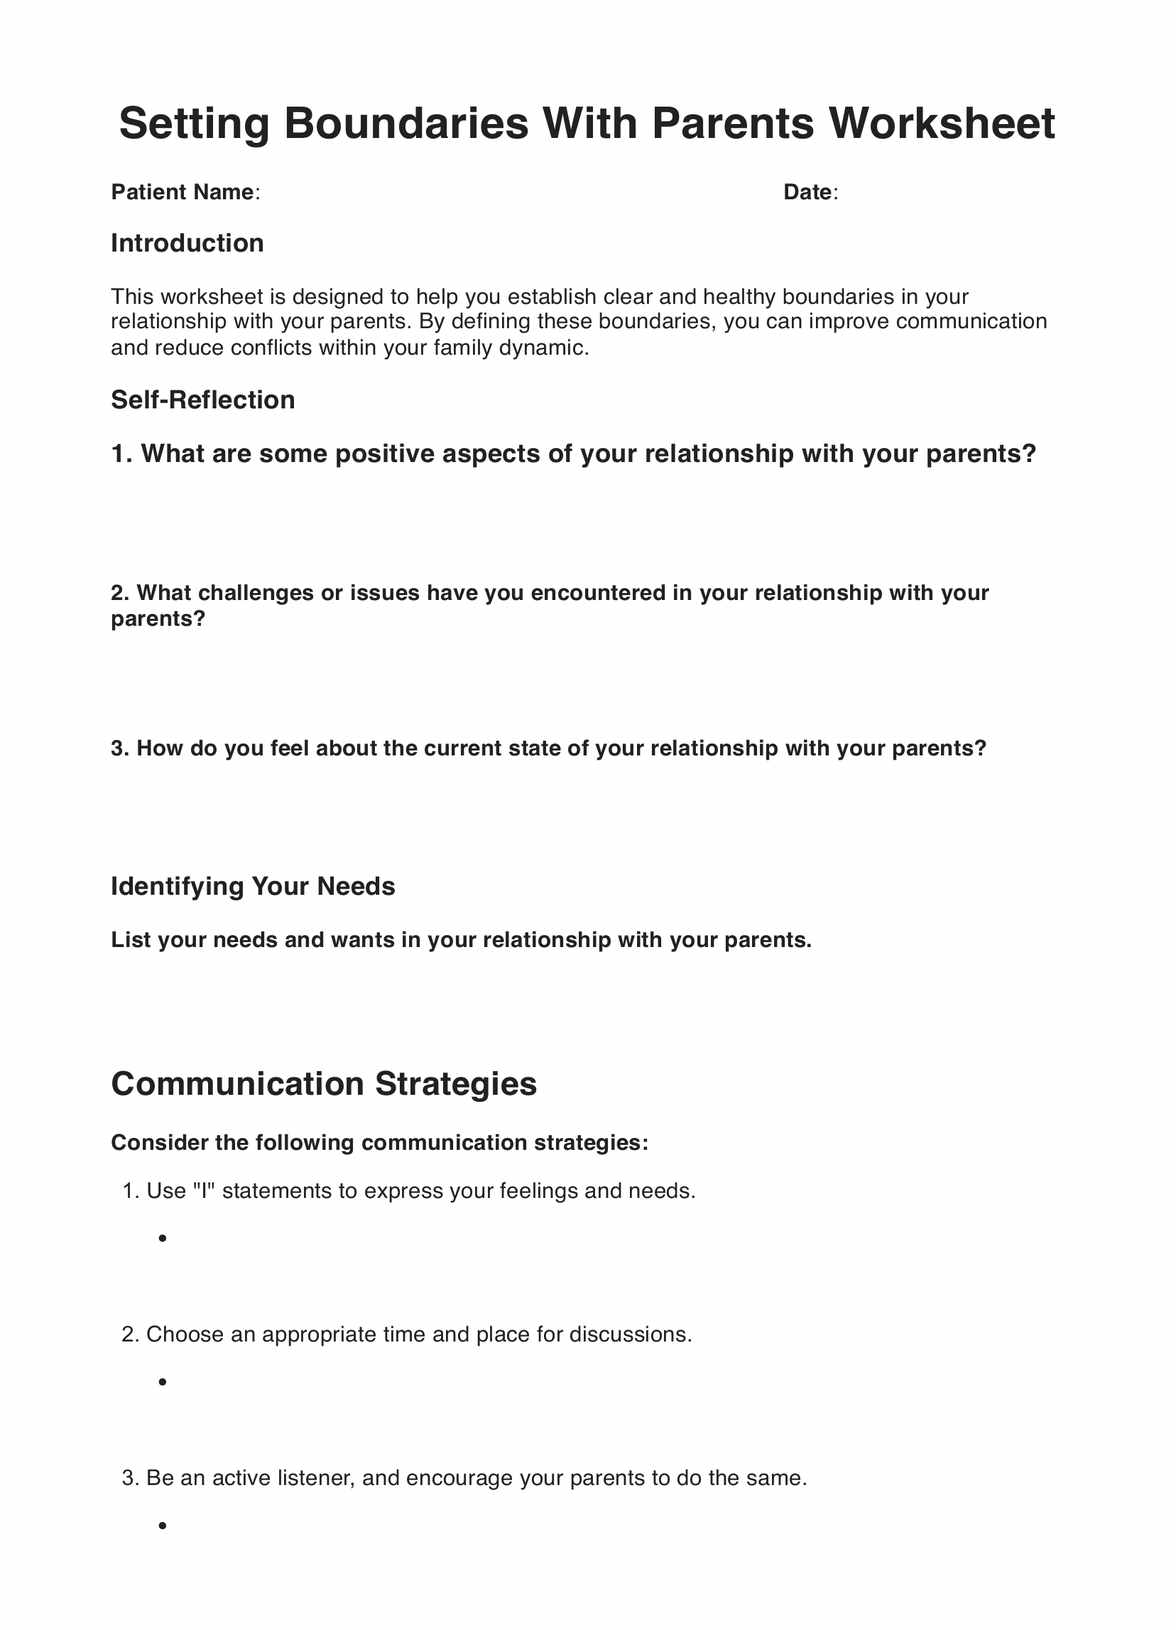 Setting Boundaries With Parents Worksheets PDF Example